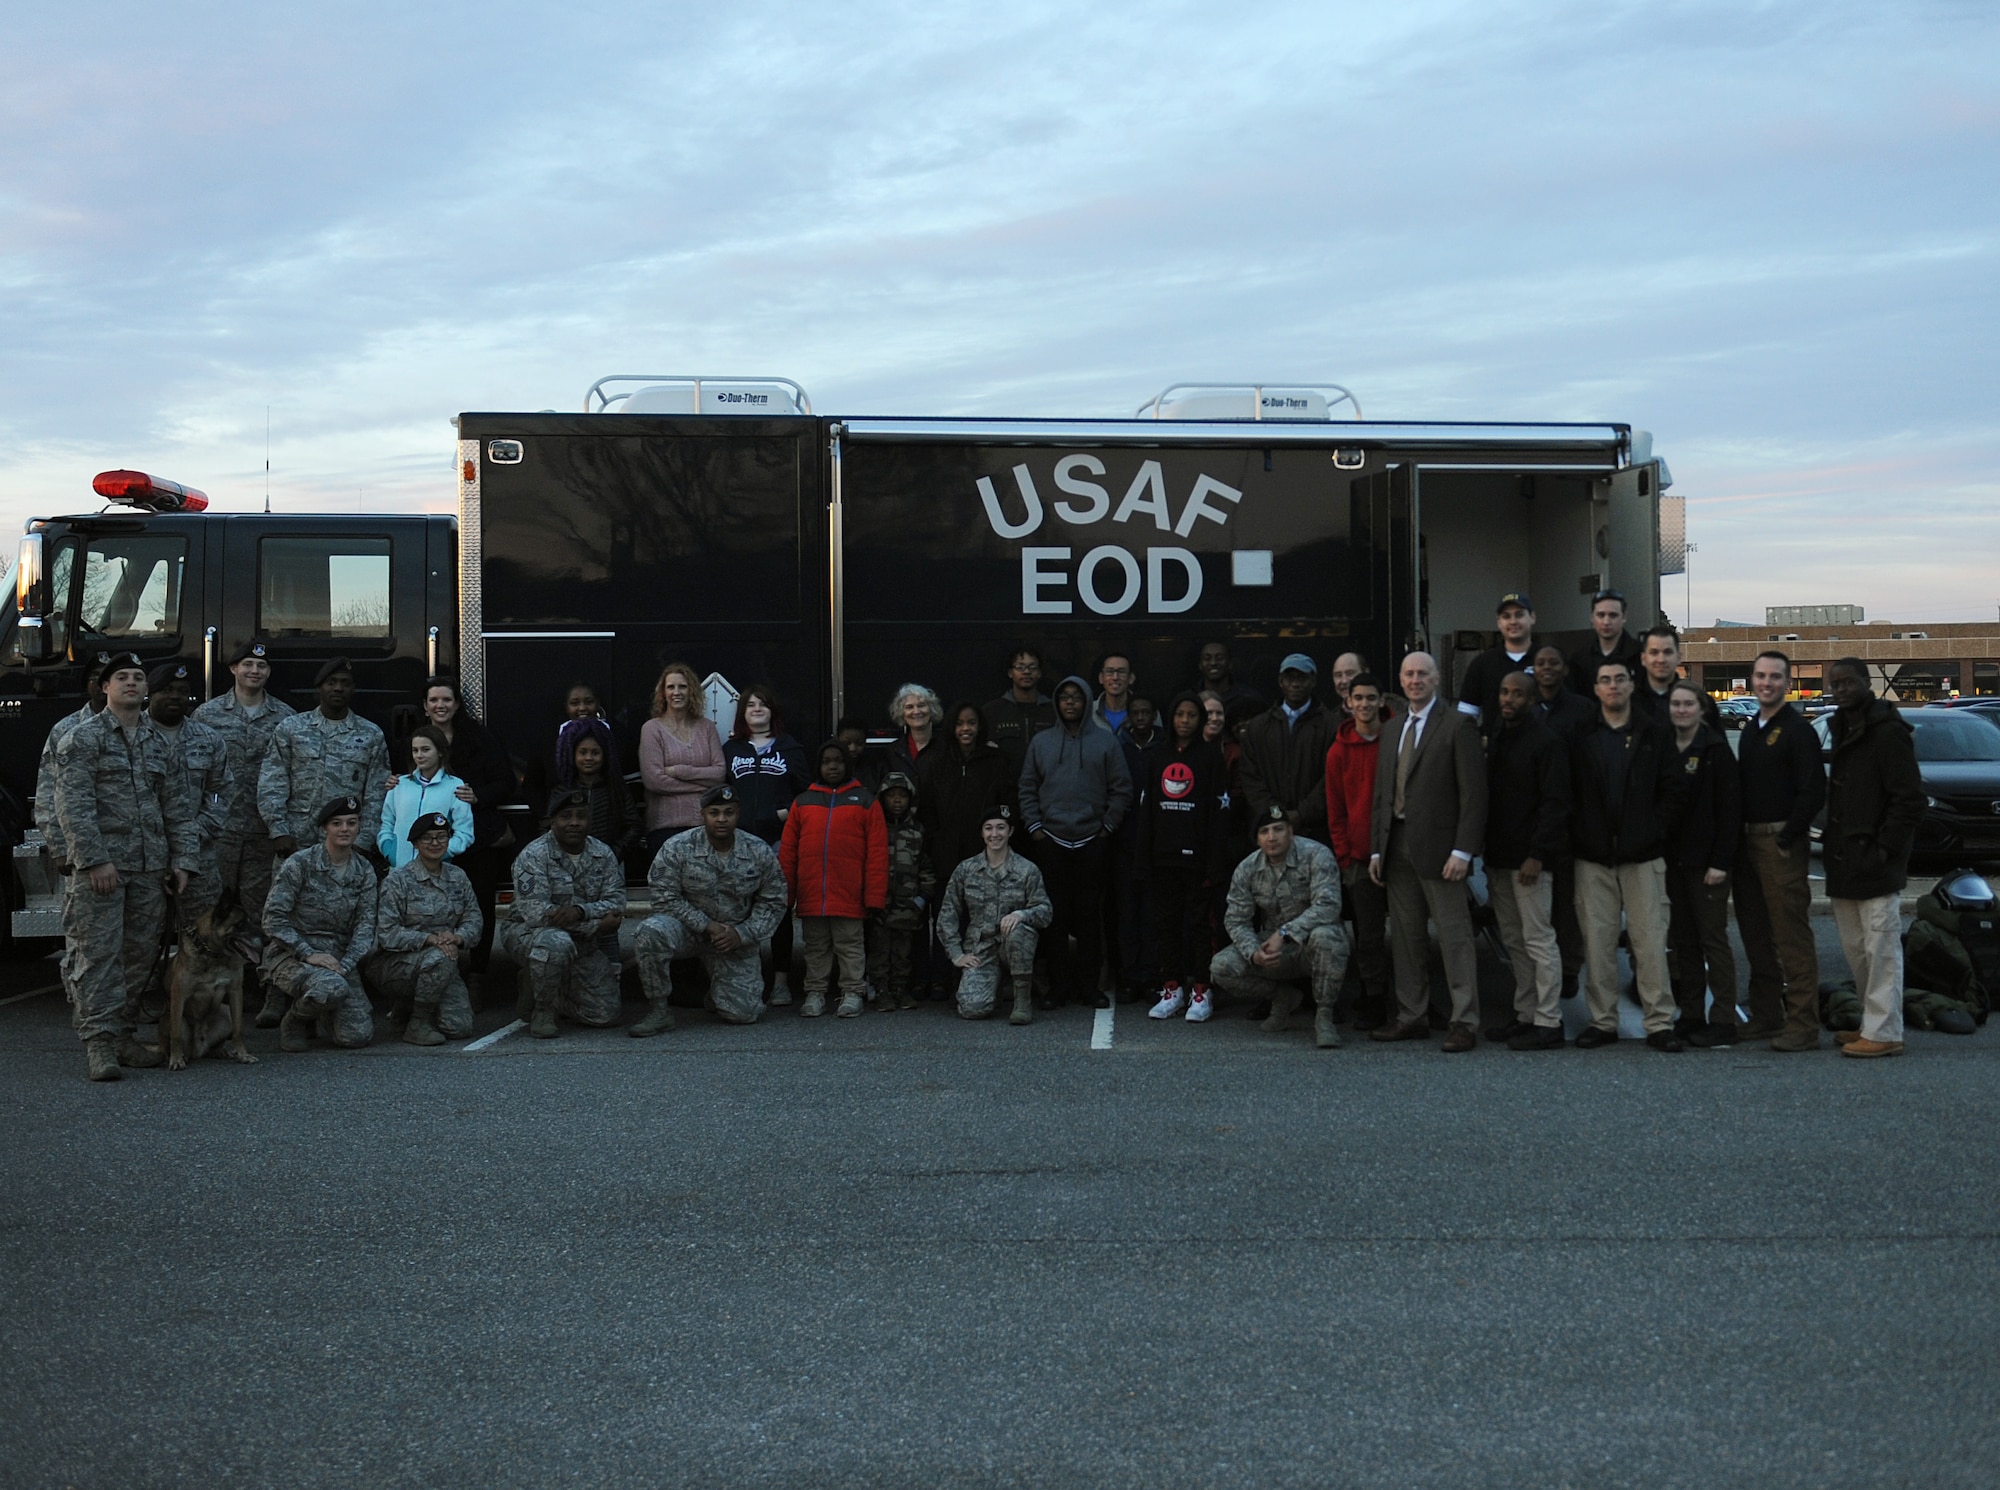 U.S. Air Force service members pose with local youth from The Up Center’s Team Up mentoring program, a non-profit organization in Hampton Roads, during the “Shop with a Cop” event at Joint Base Langley-Eustis, Va., Dec. 19, 2017.